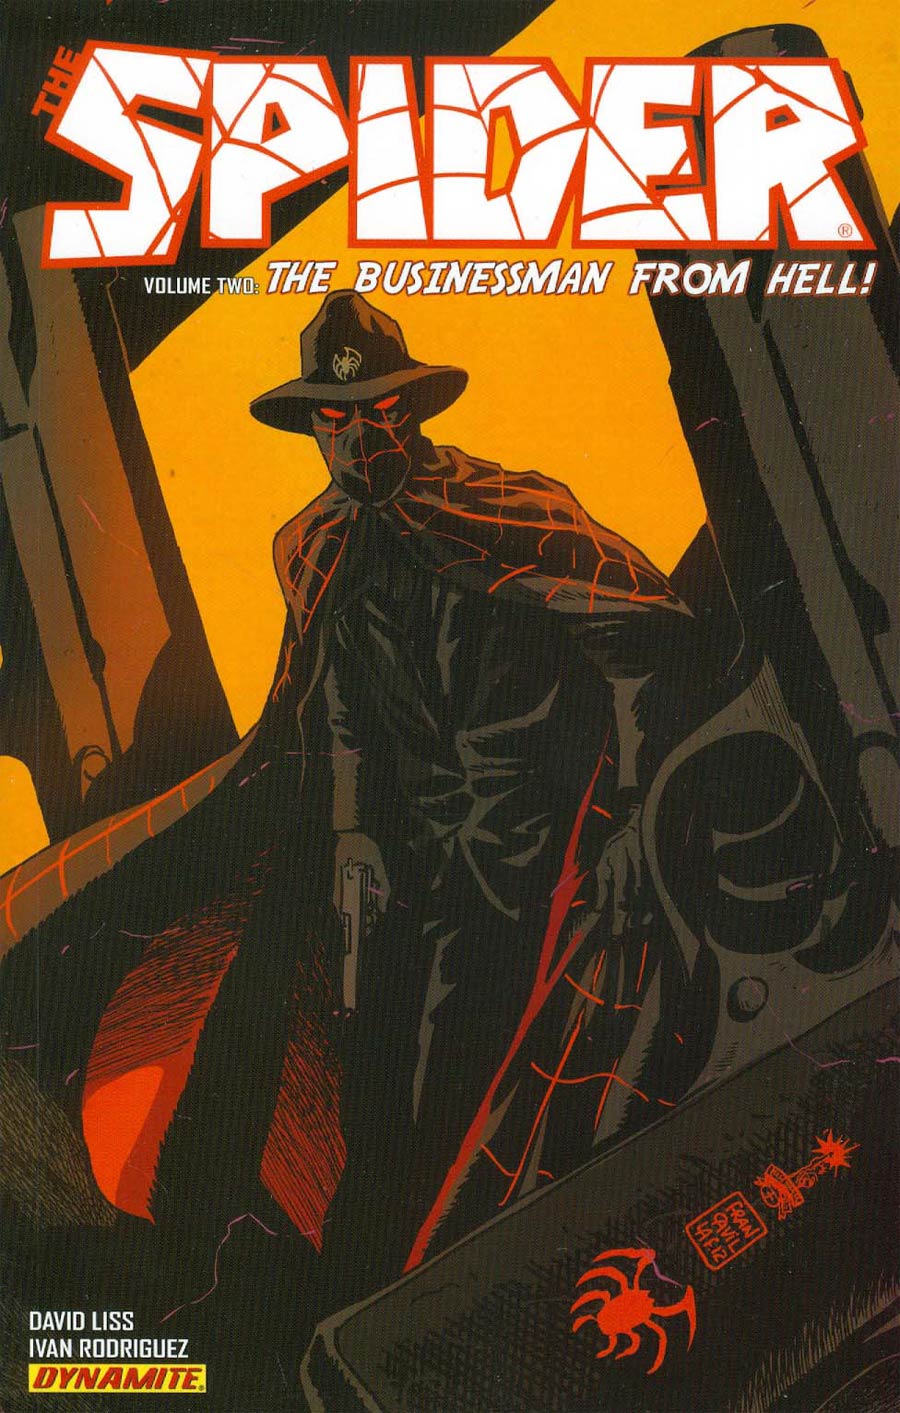 Spider Vol 2 Businessman From Hell TP